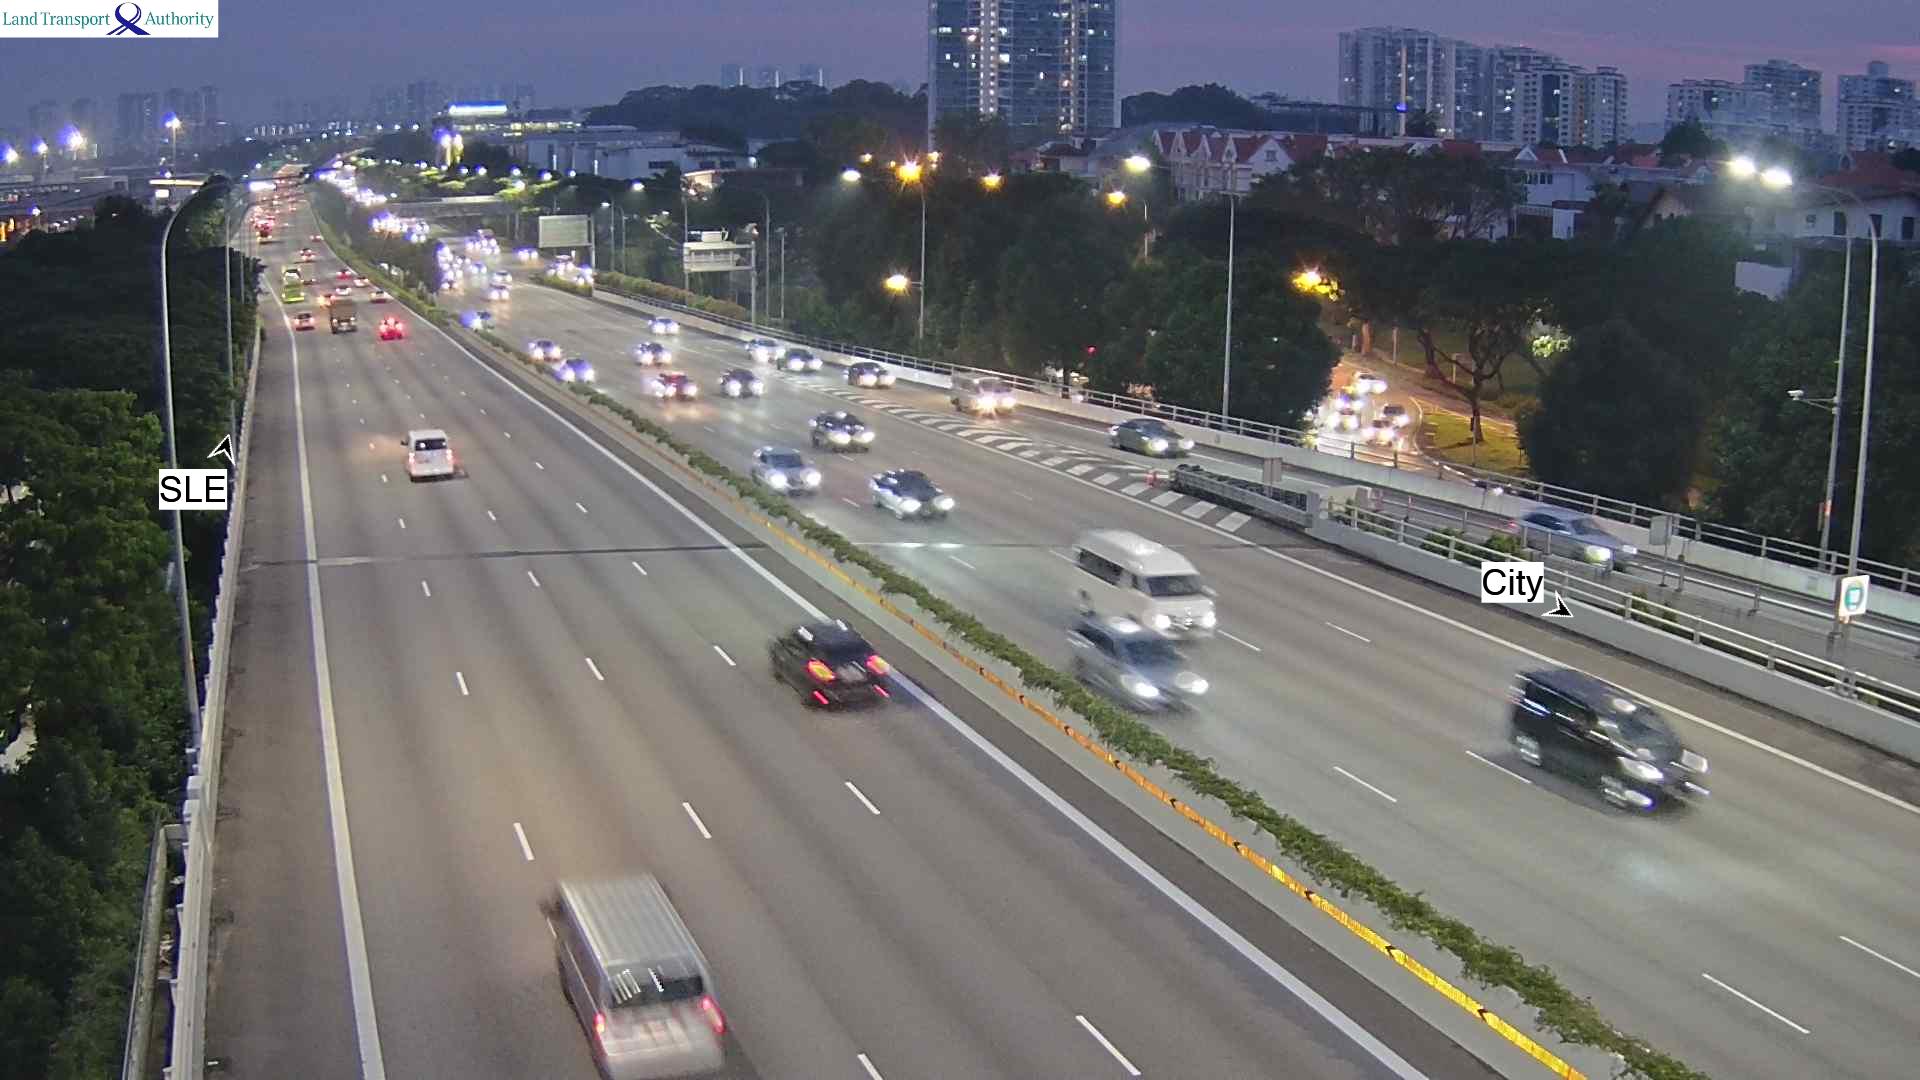 View from Braddell Flyover - Central Expressway (CTE) - Singapore